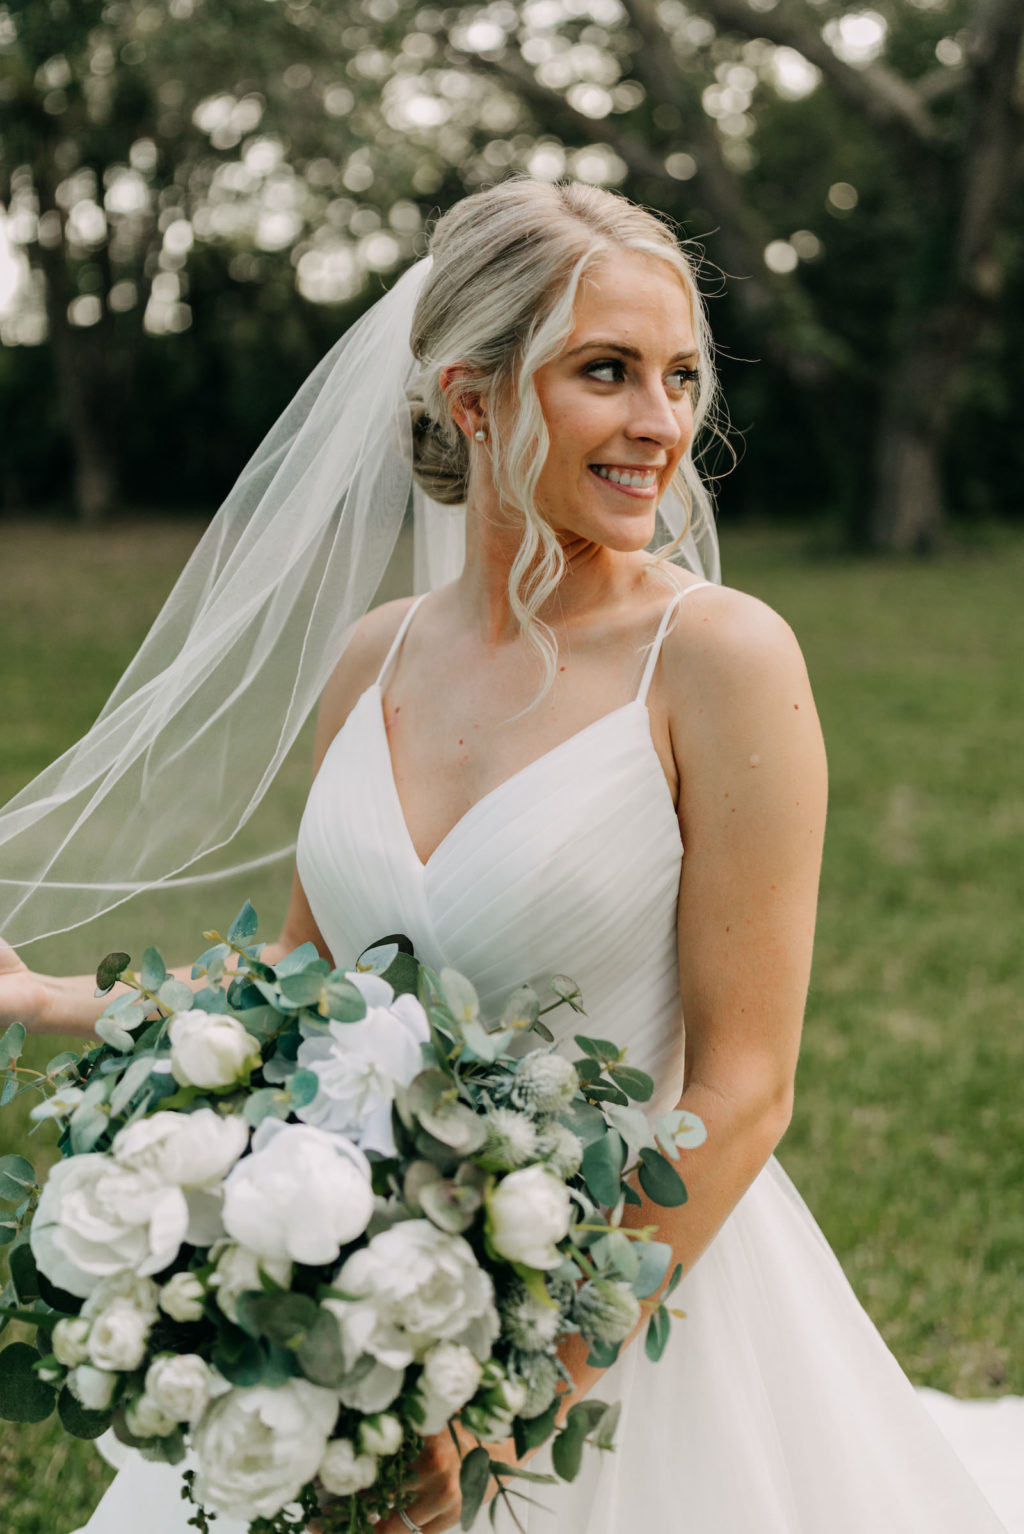 Classic Bride with Neutral Makeup and Hair in Bun and Veil in V Neckline Wedding Dress Holding White Floral and Greenery Eucalyptus Bouquet | Tampa Bay Wedding Photographer Amber McWhorter Photography | Wedding Hair and Makeup Femme Akoi Beauty Studio